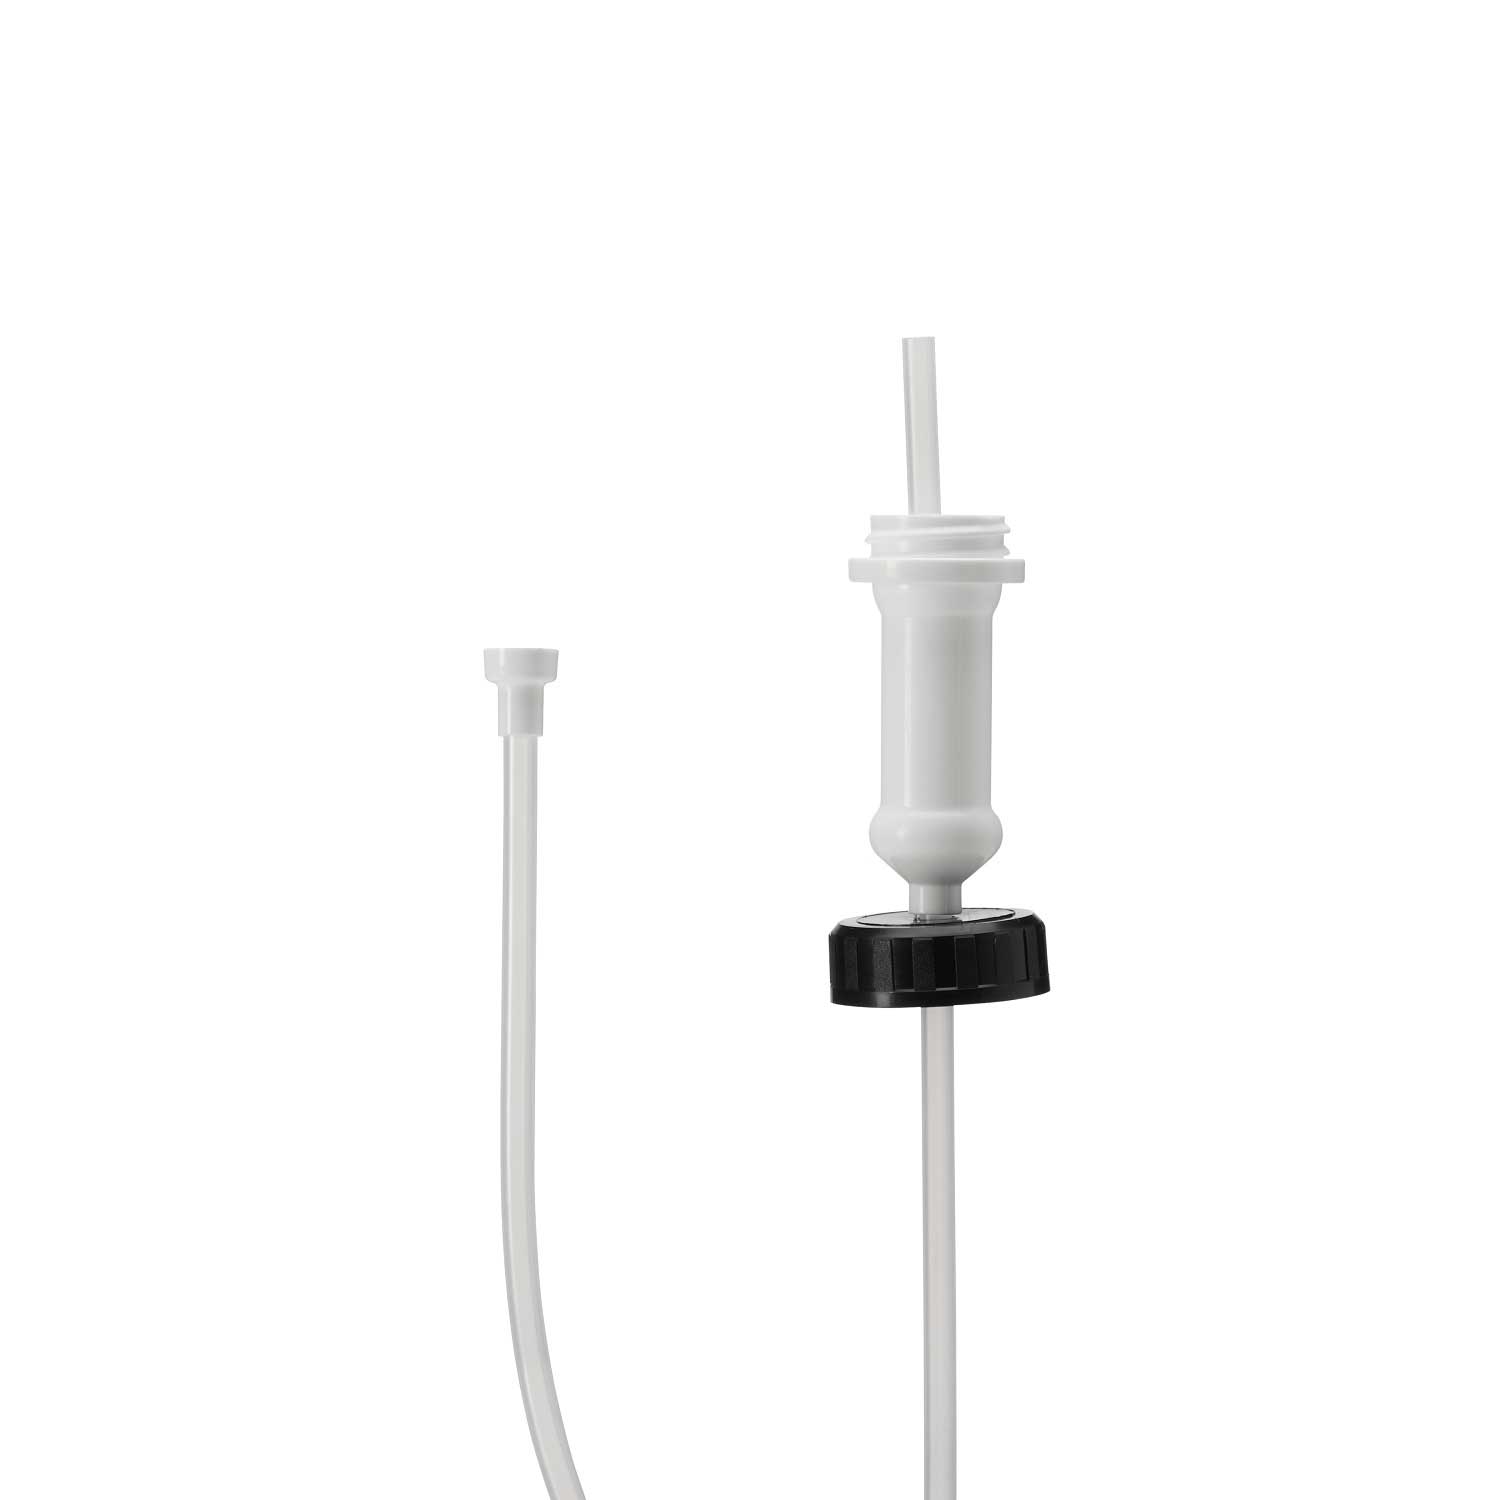 Providers Of Remote Tube with 38mm Screw Cap UK